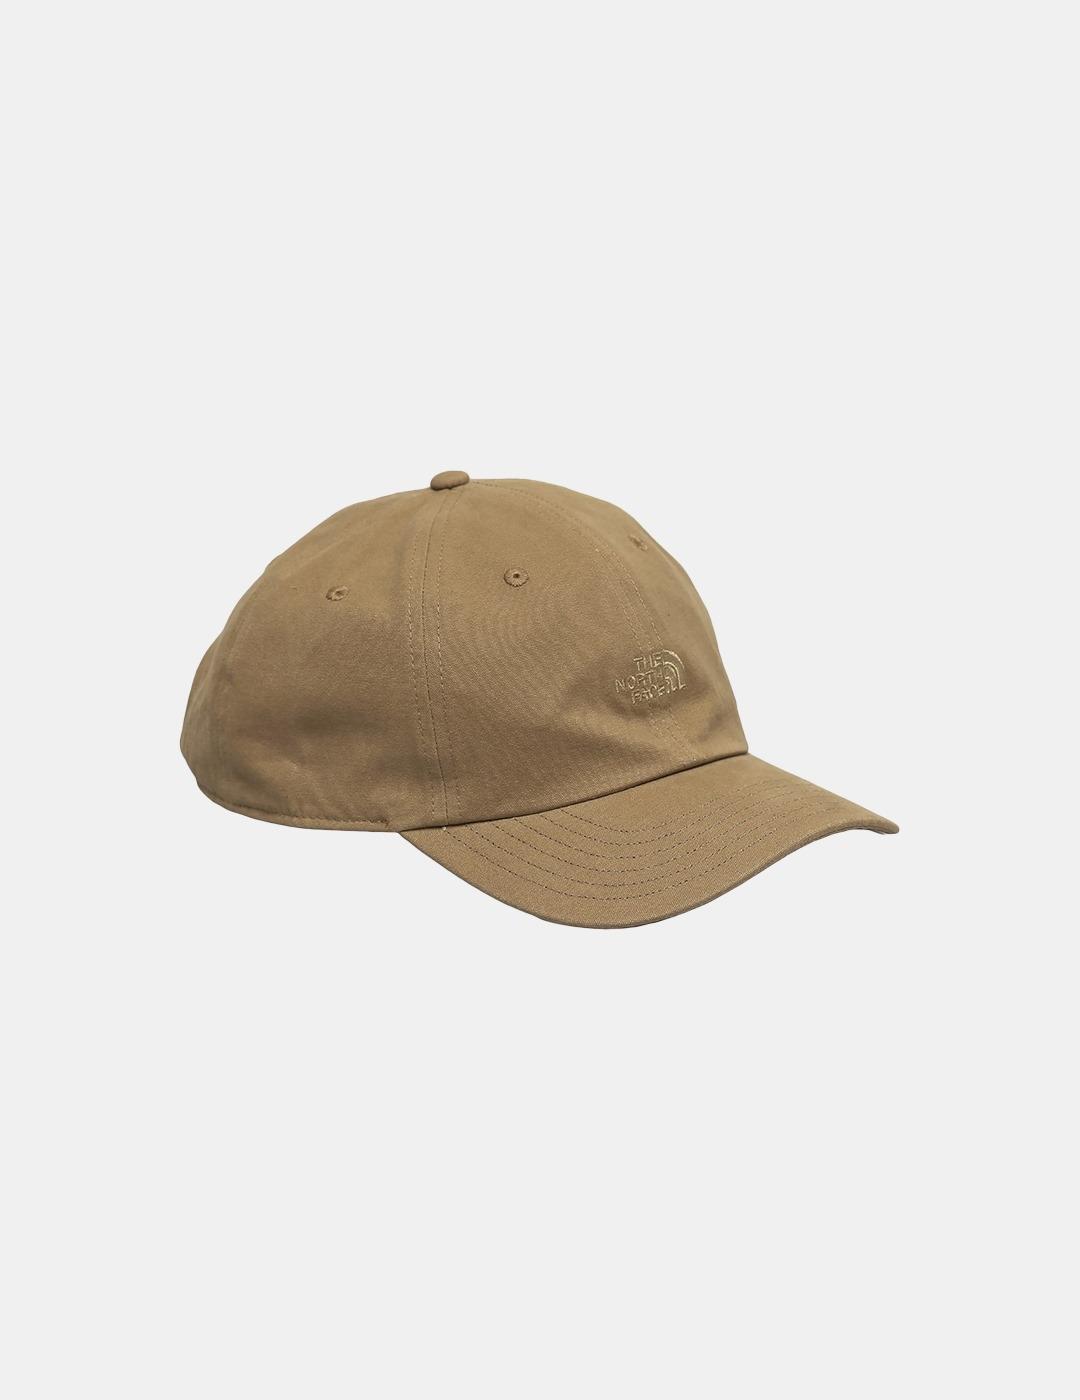 Gorra The North Face Norm Washed Caqui